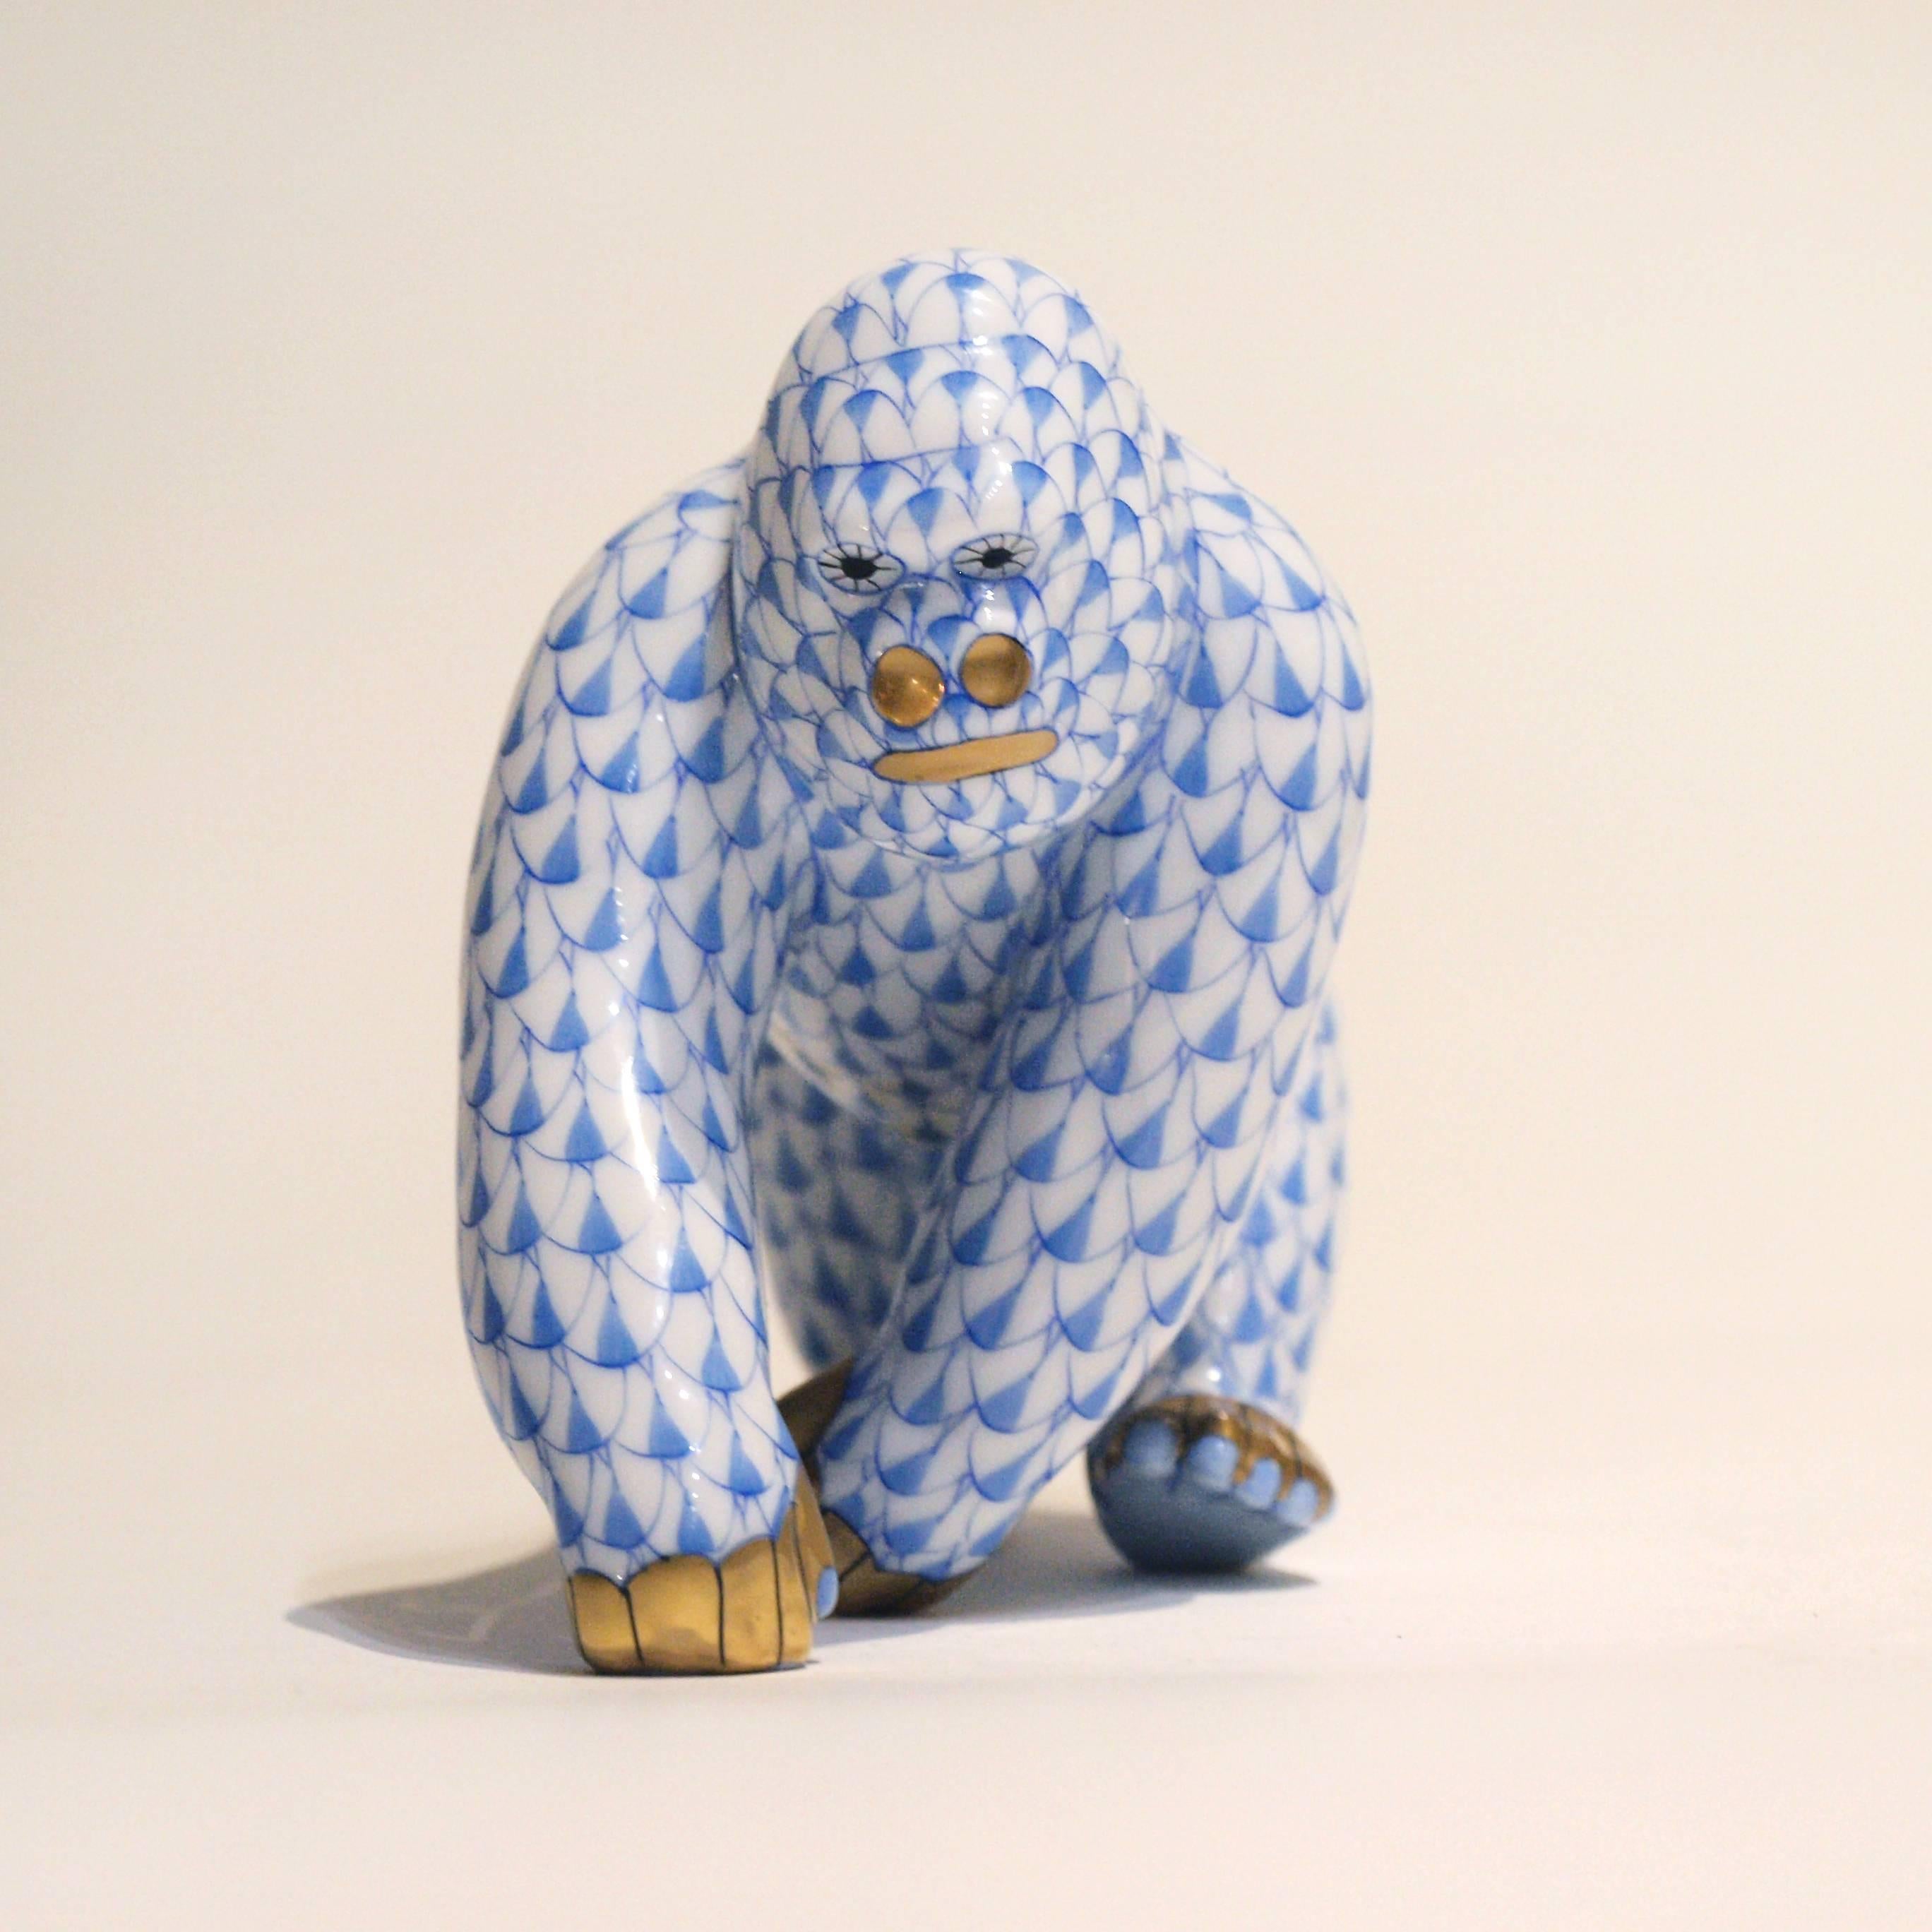 A Herend gorilla painted in Vieux Herend with blue fish scale. This fishnet or fish scale is a typical motif of Herend.